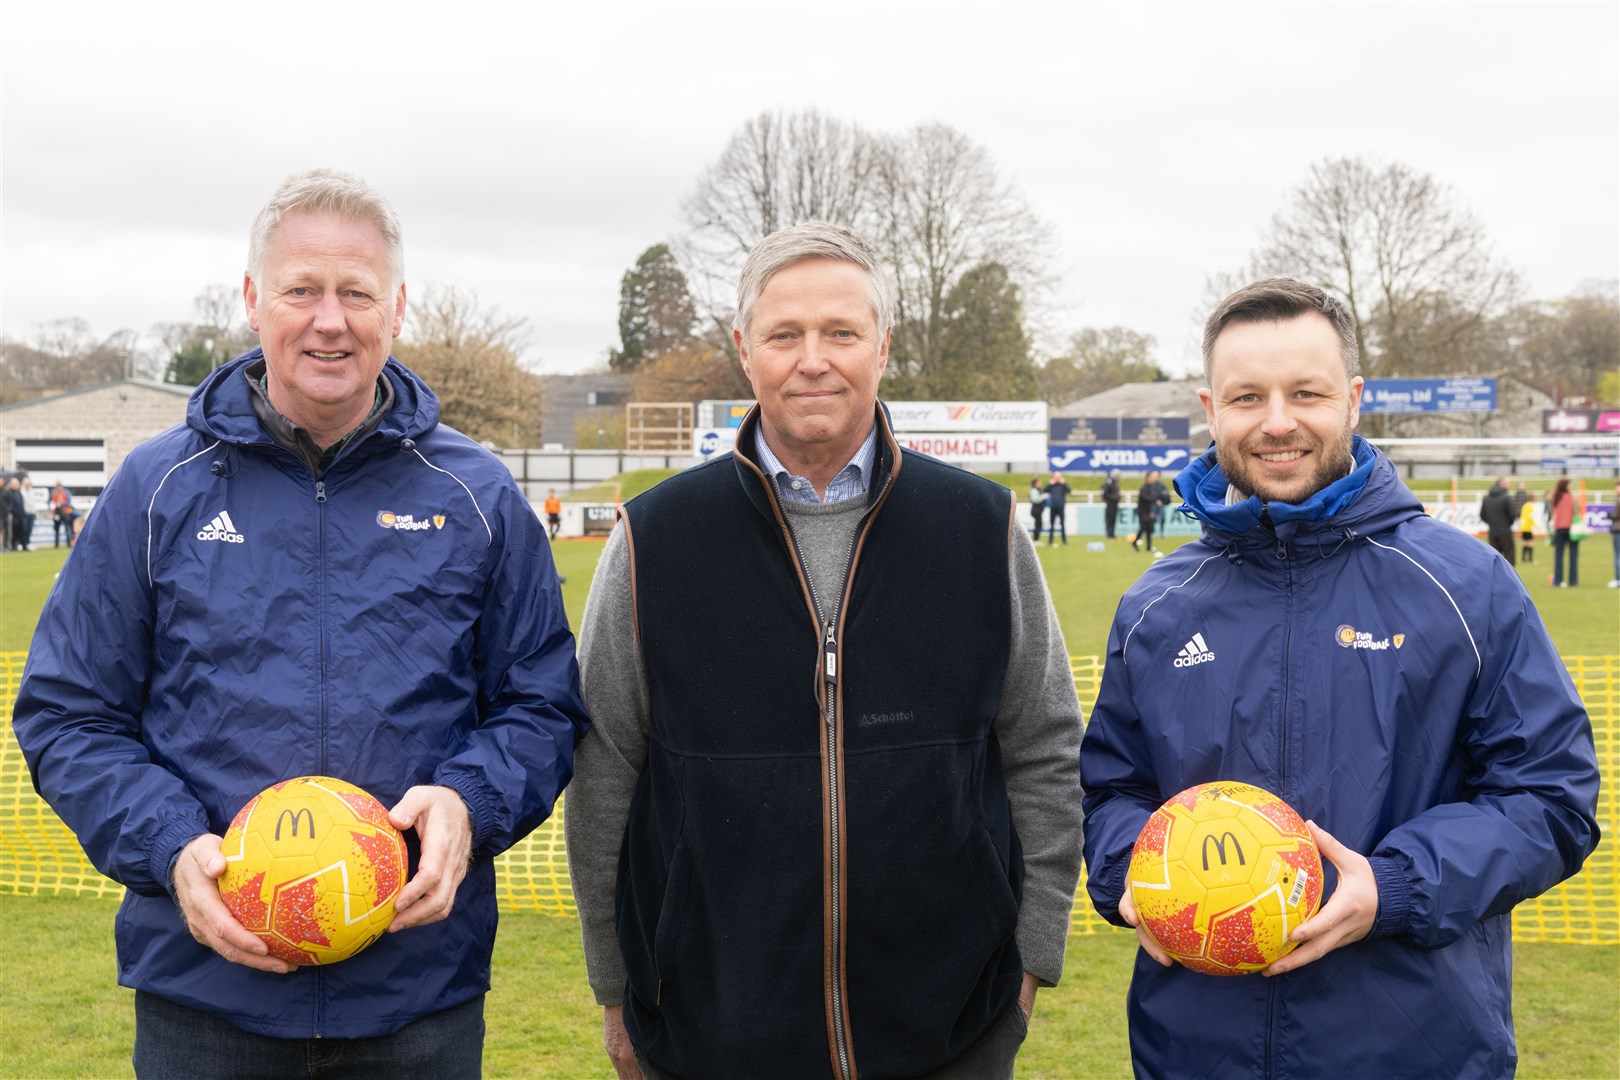 From left: Craig Duncan, Edward Mountain MSP and Iain Fyfe at the McDonald's Fun Football Festival Event. Picture: Beth Taylor